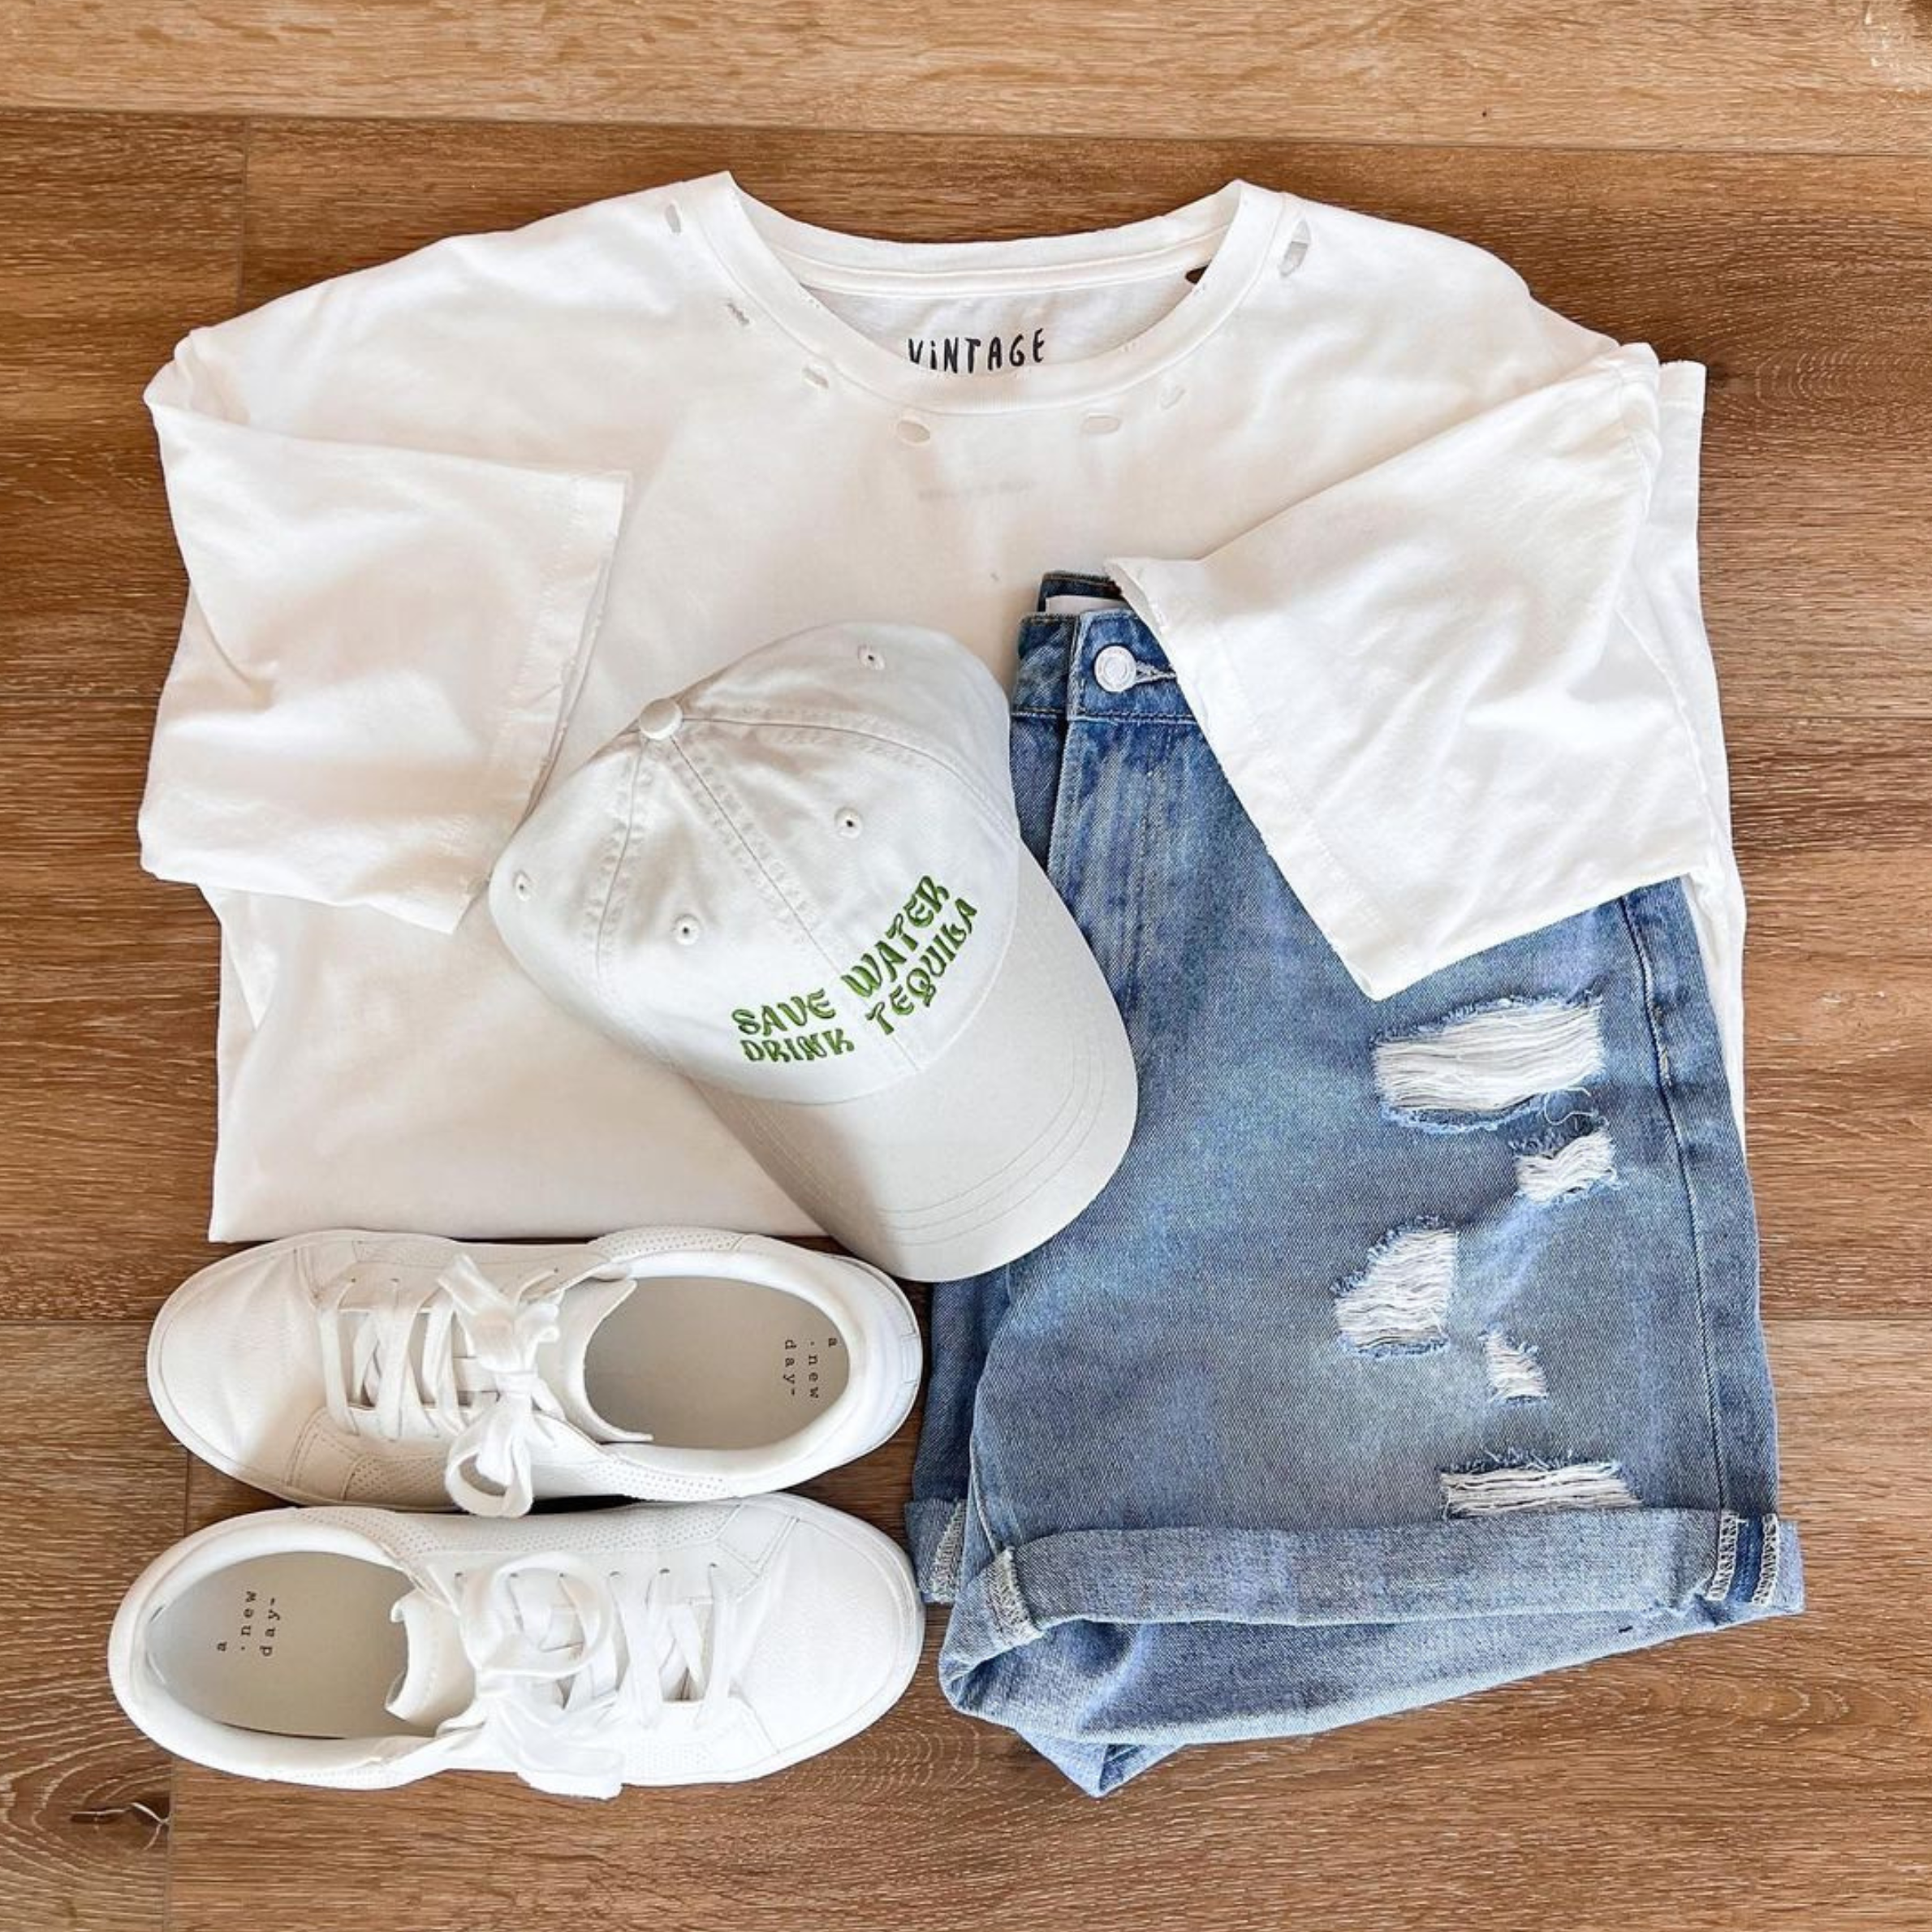 Effortlessly Stylish: 3-5 Ways to Rock a White Tee